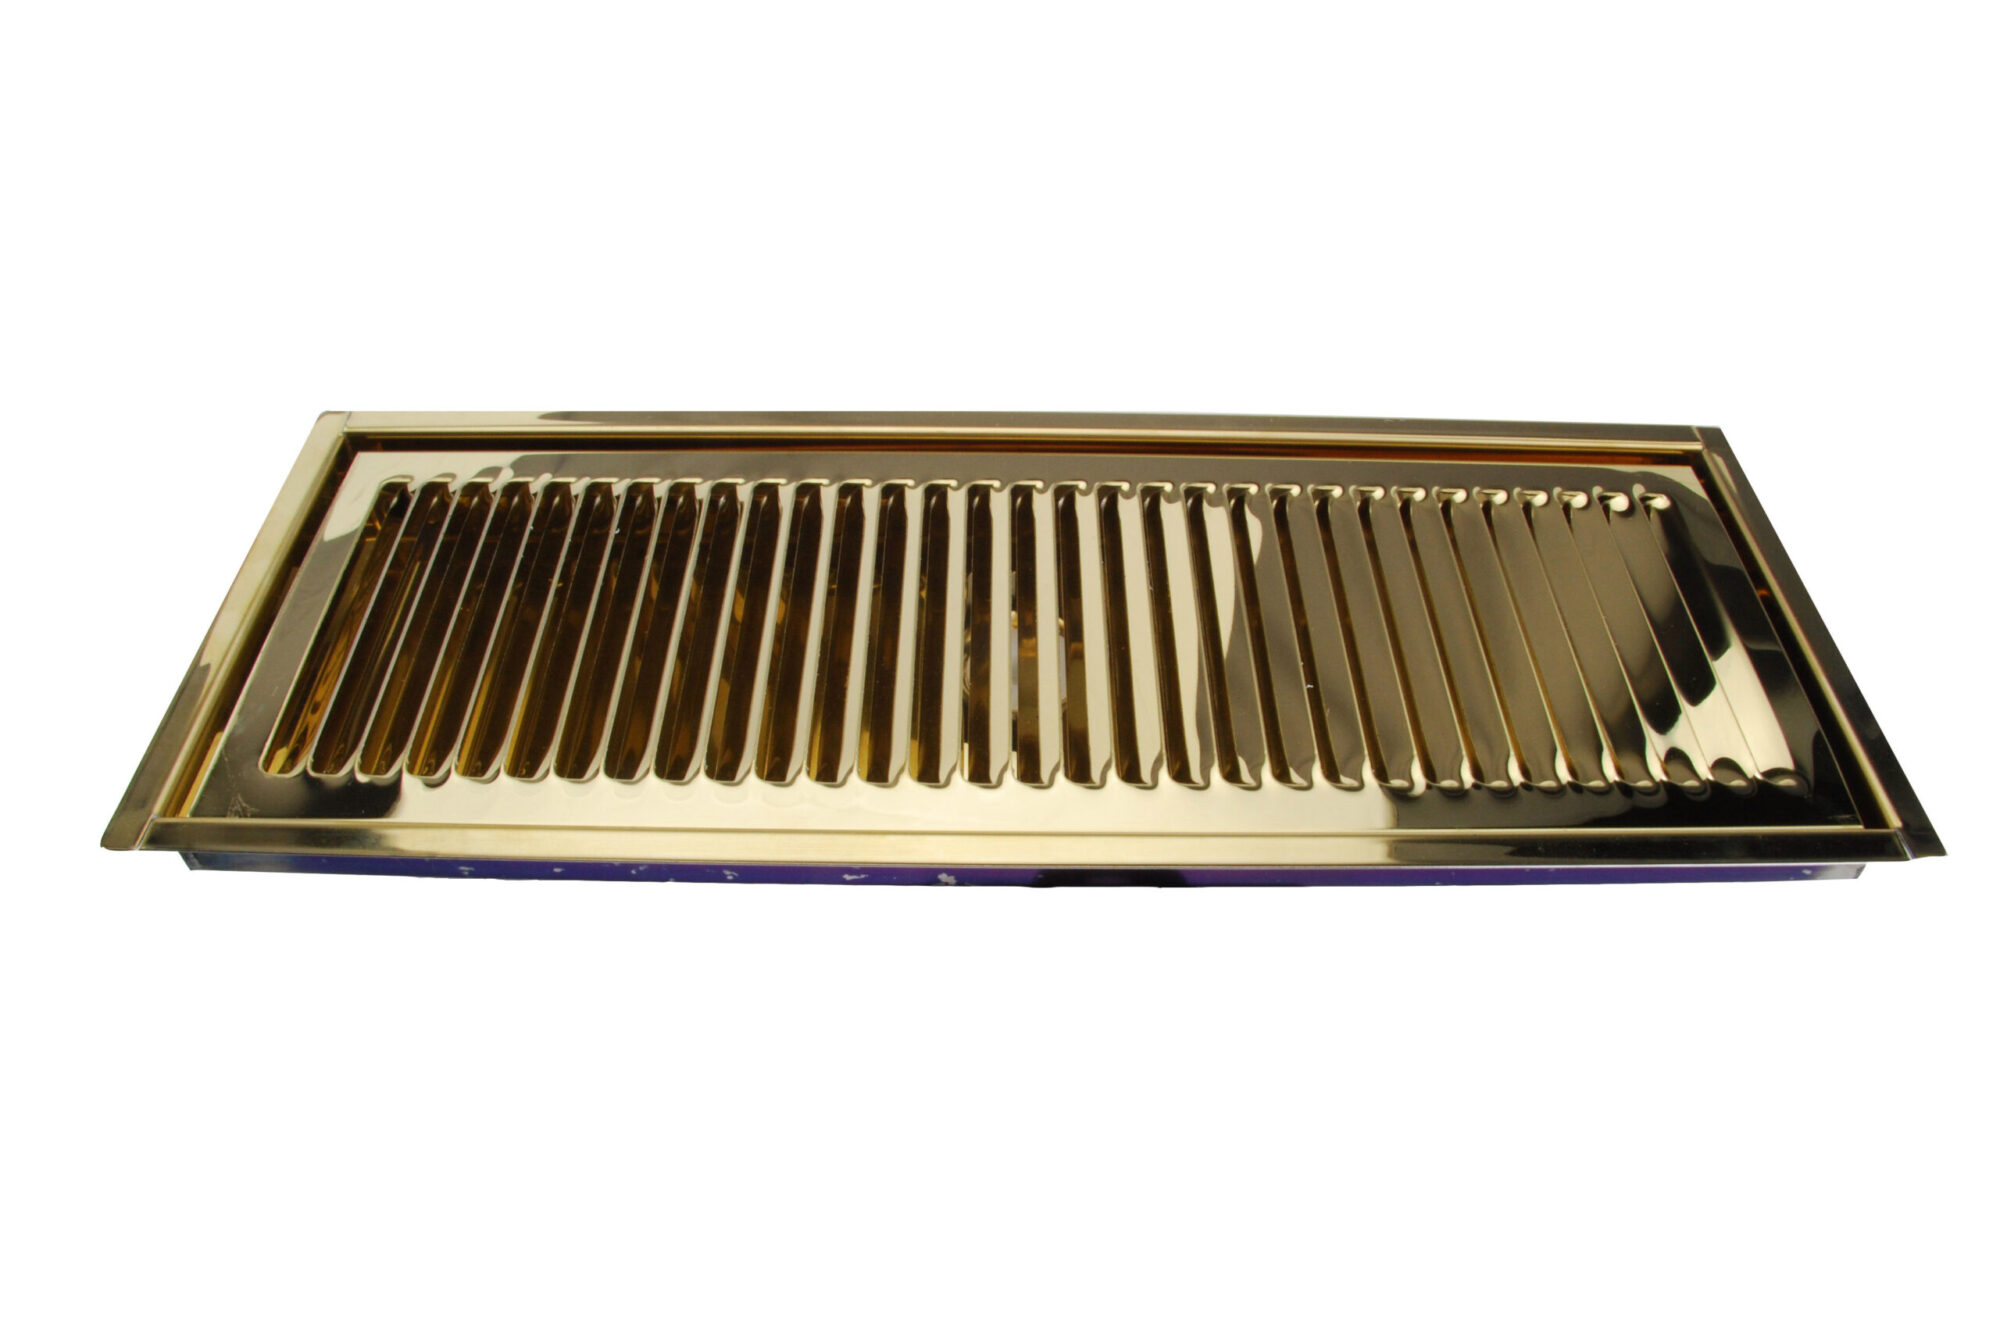 616FLBM PVD Brass Flush Mount Tray with Drain and PVD Brass Grid - 24"L x 5 3/8"W x 3/4"D